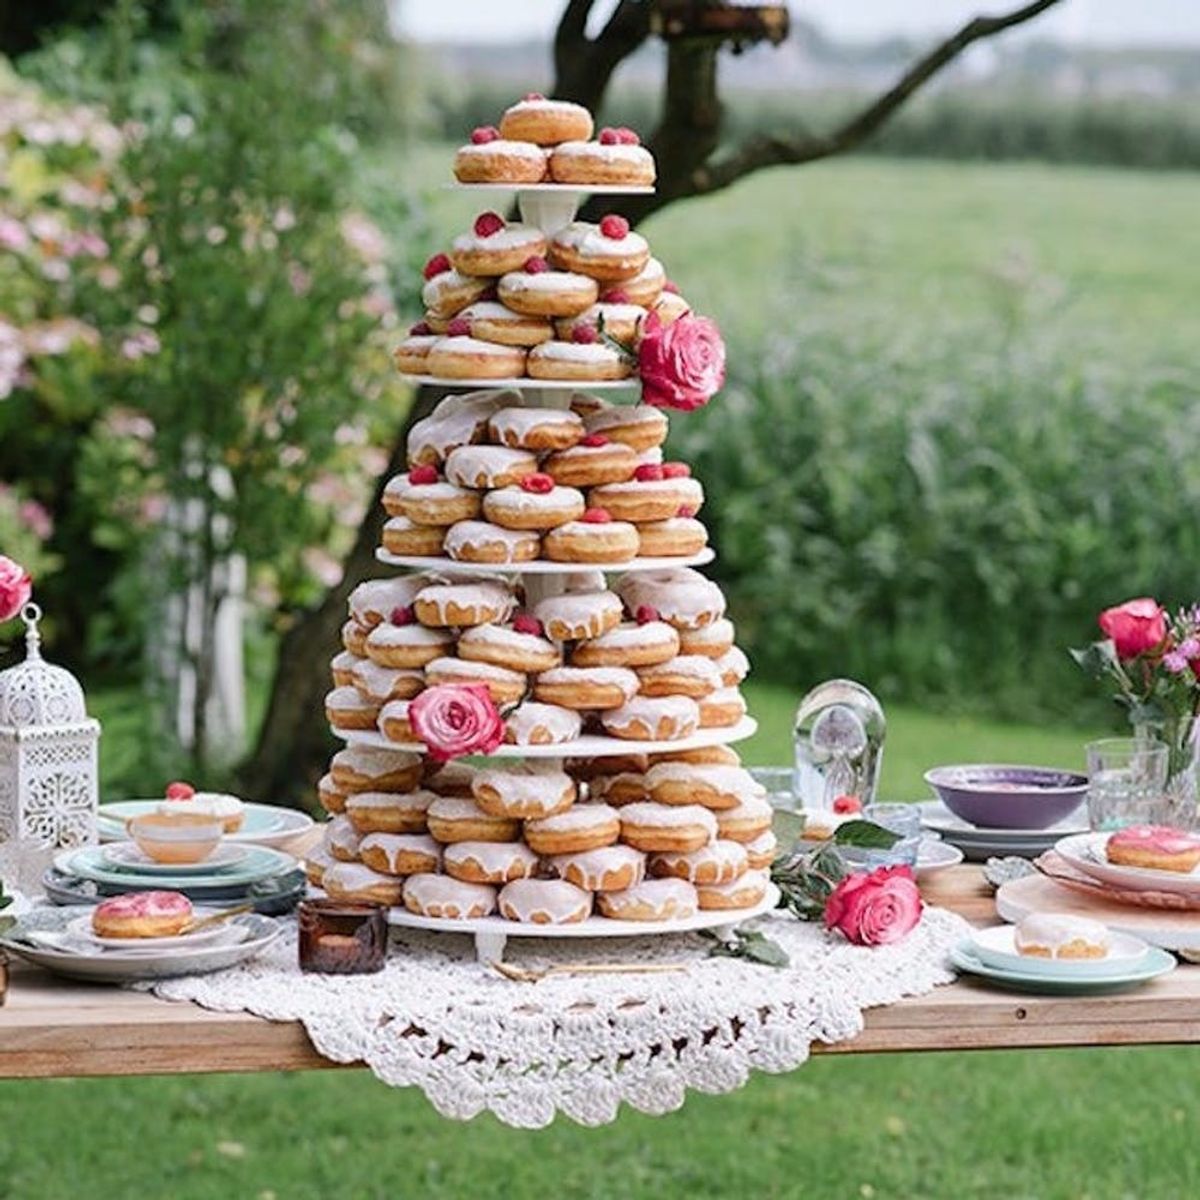 26 Reasons to Throw an Epic Brunch Wedding